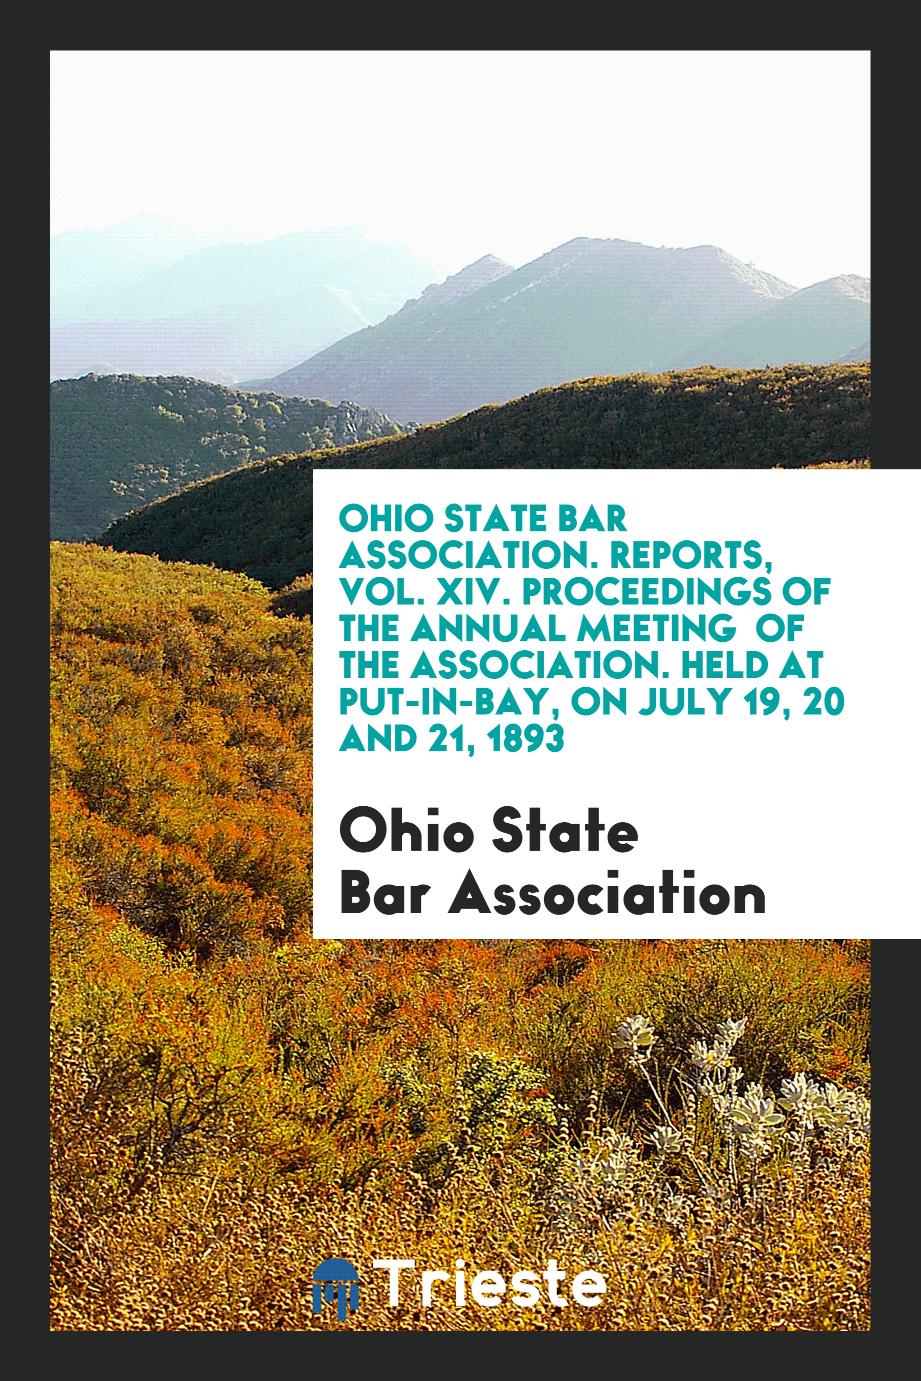 Ohio State Bar Association. Reports, Vol. XIV. Proceedings of the Annual Meeting of the Association. Held at Put-In-Bay, on July 19, 20 and 21, 1893